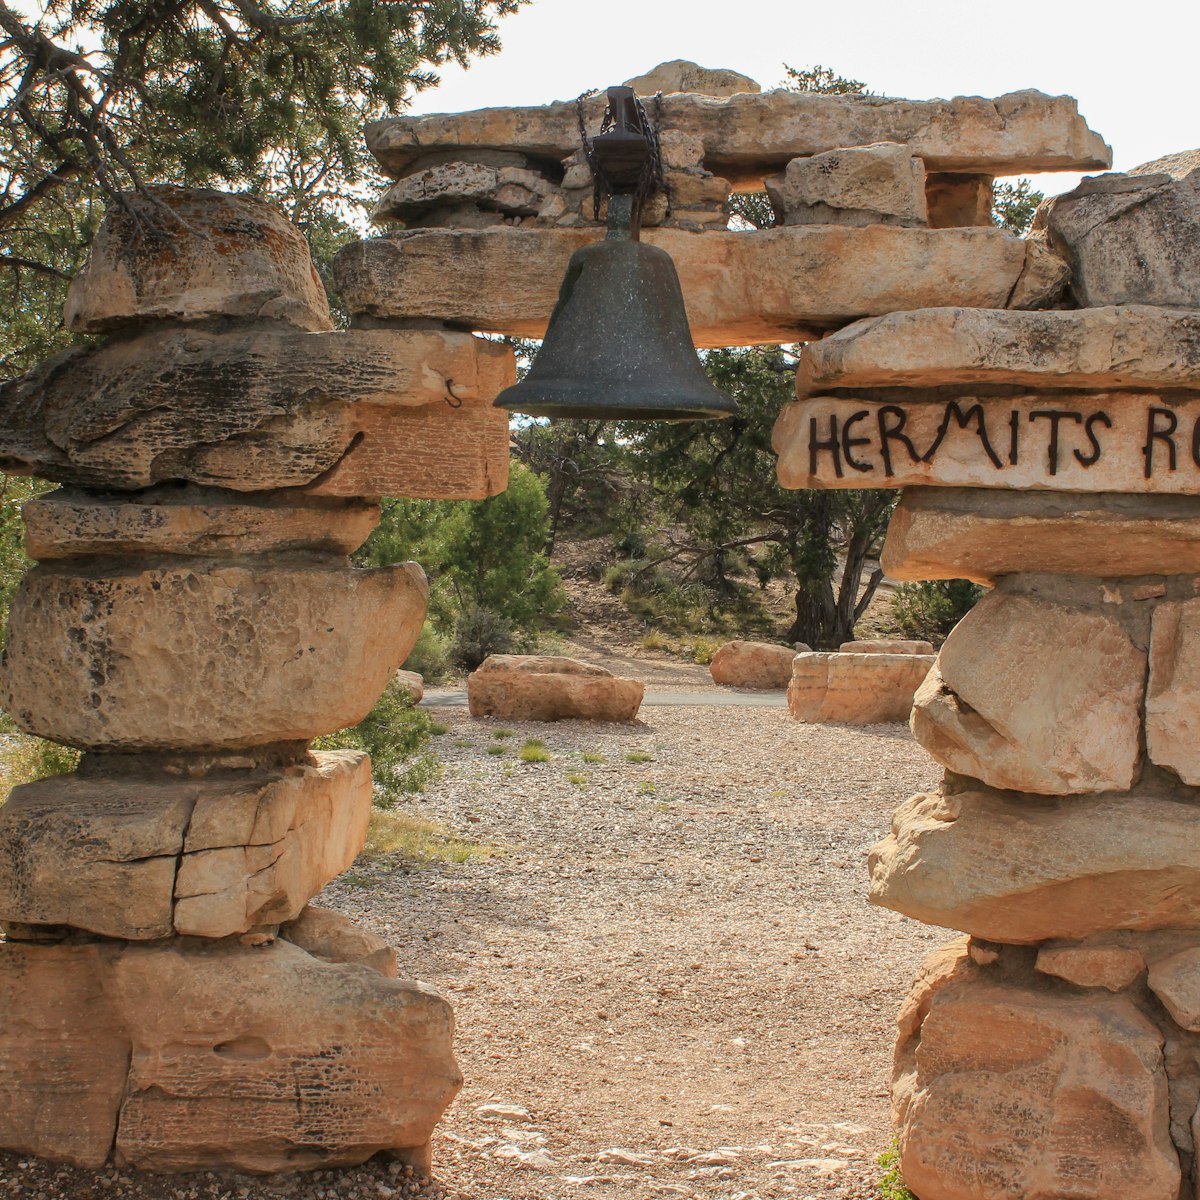 Entry arch of Hermits Rest in the Grand Canyon National Park.